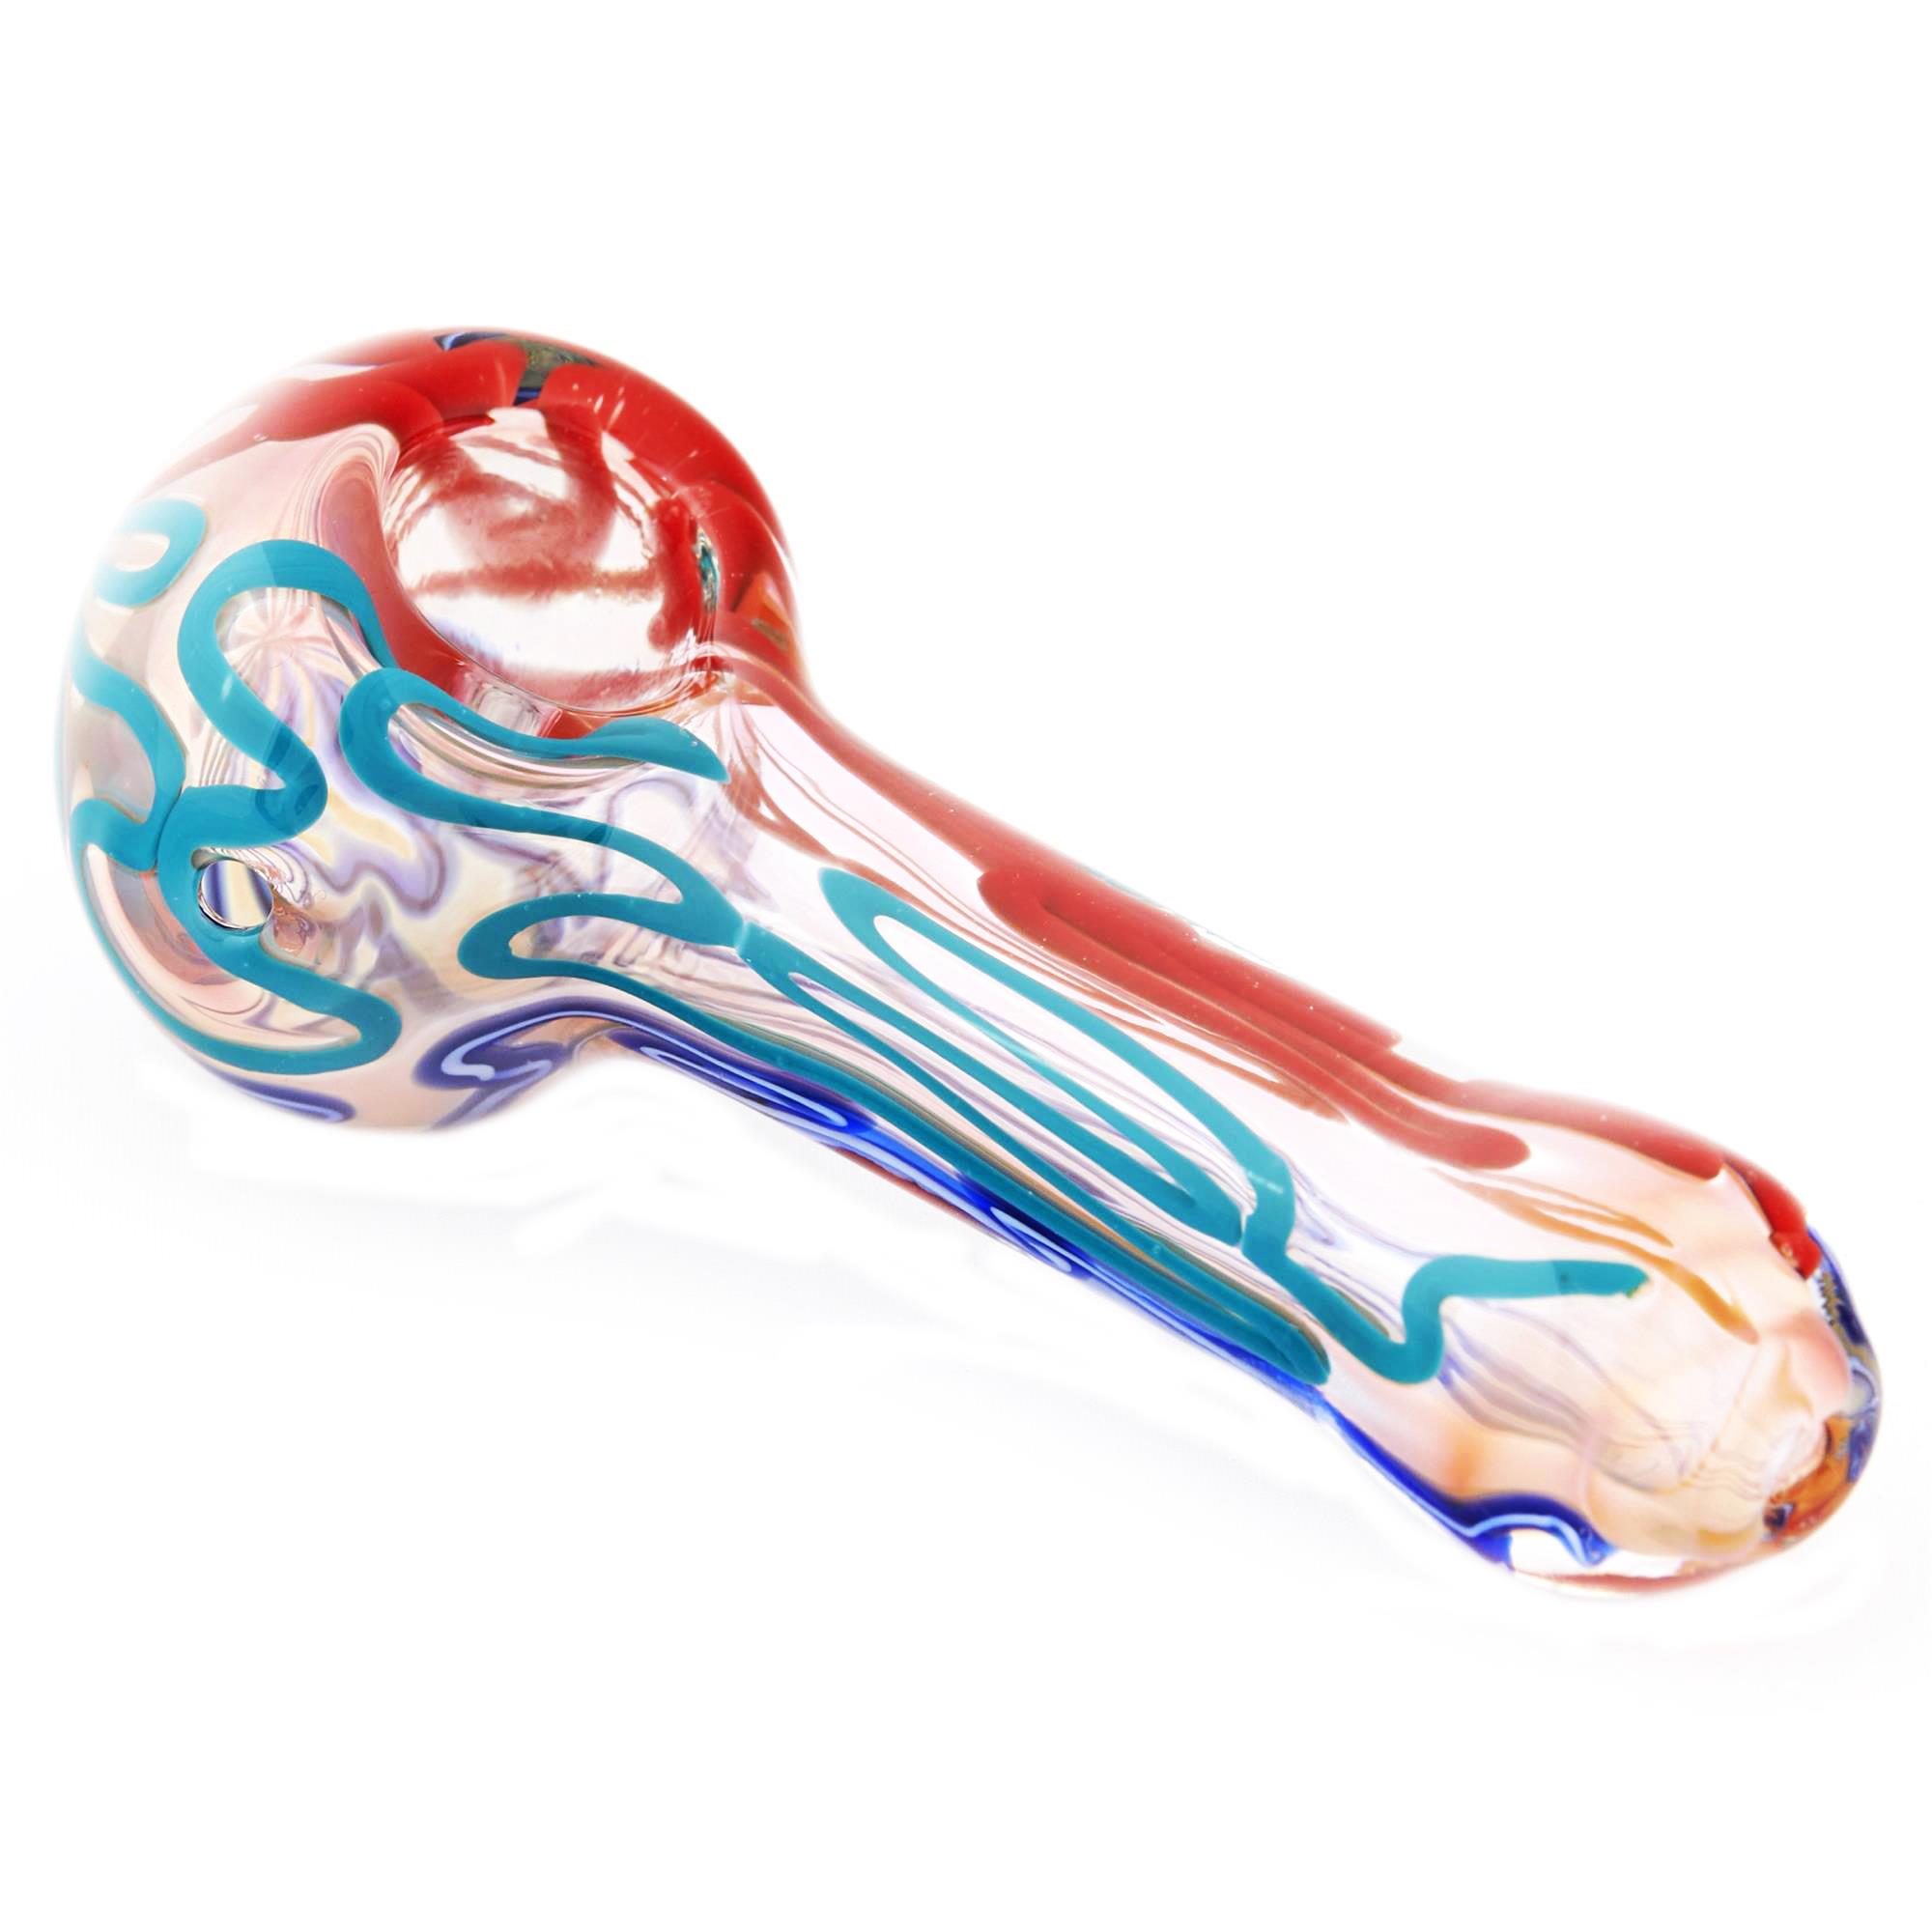 CANNABE YOURS SPOON PIPE